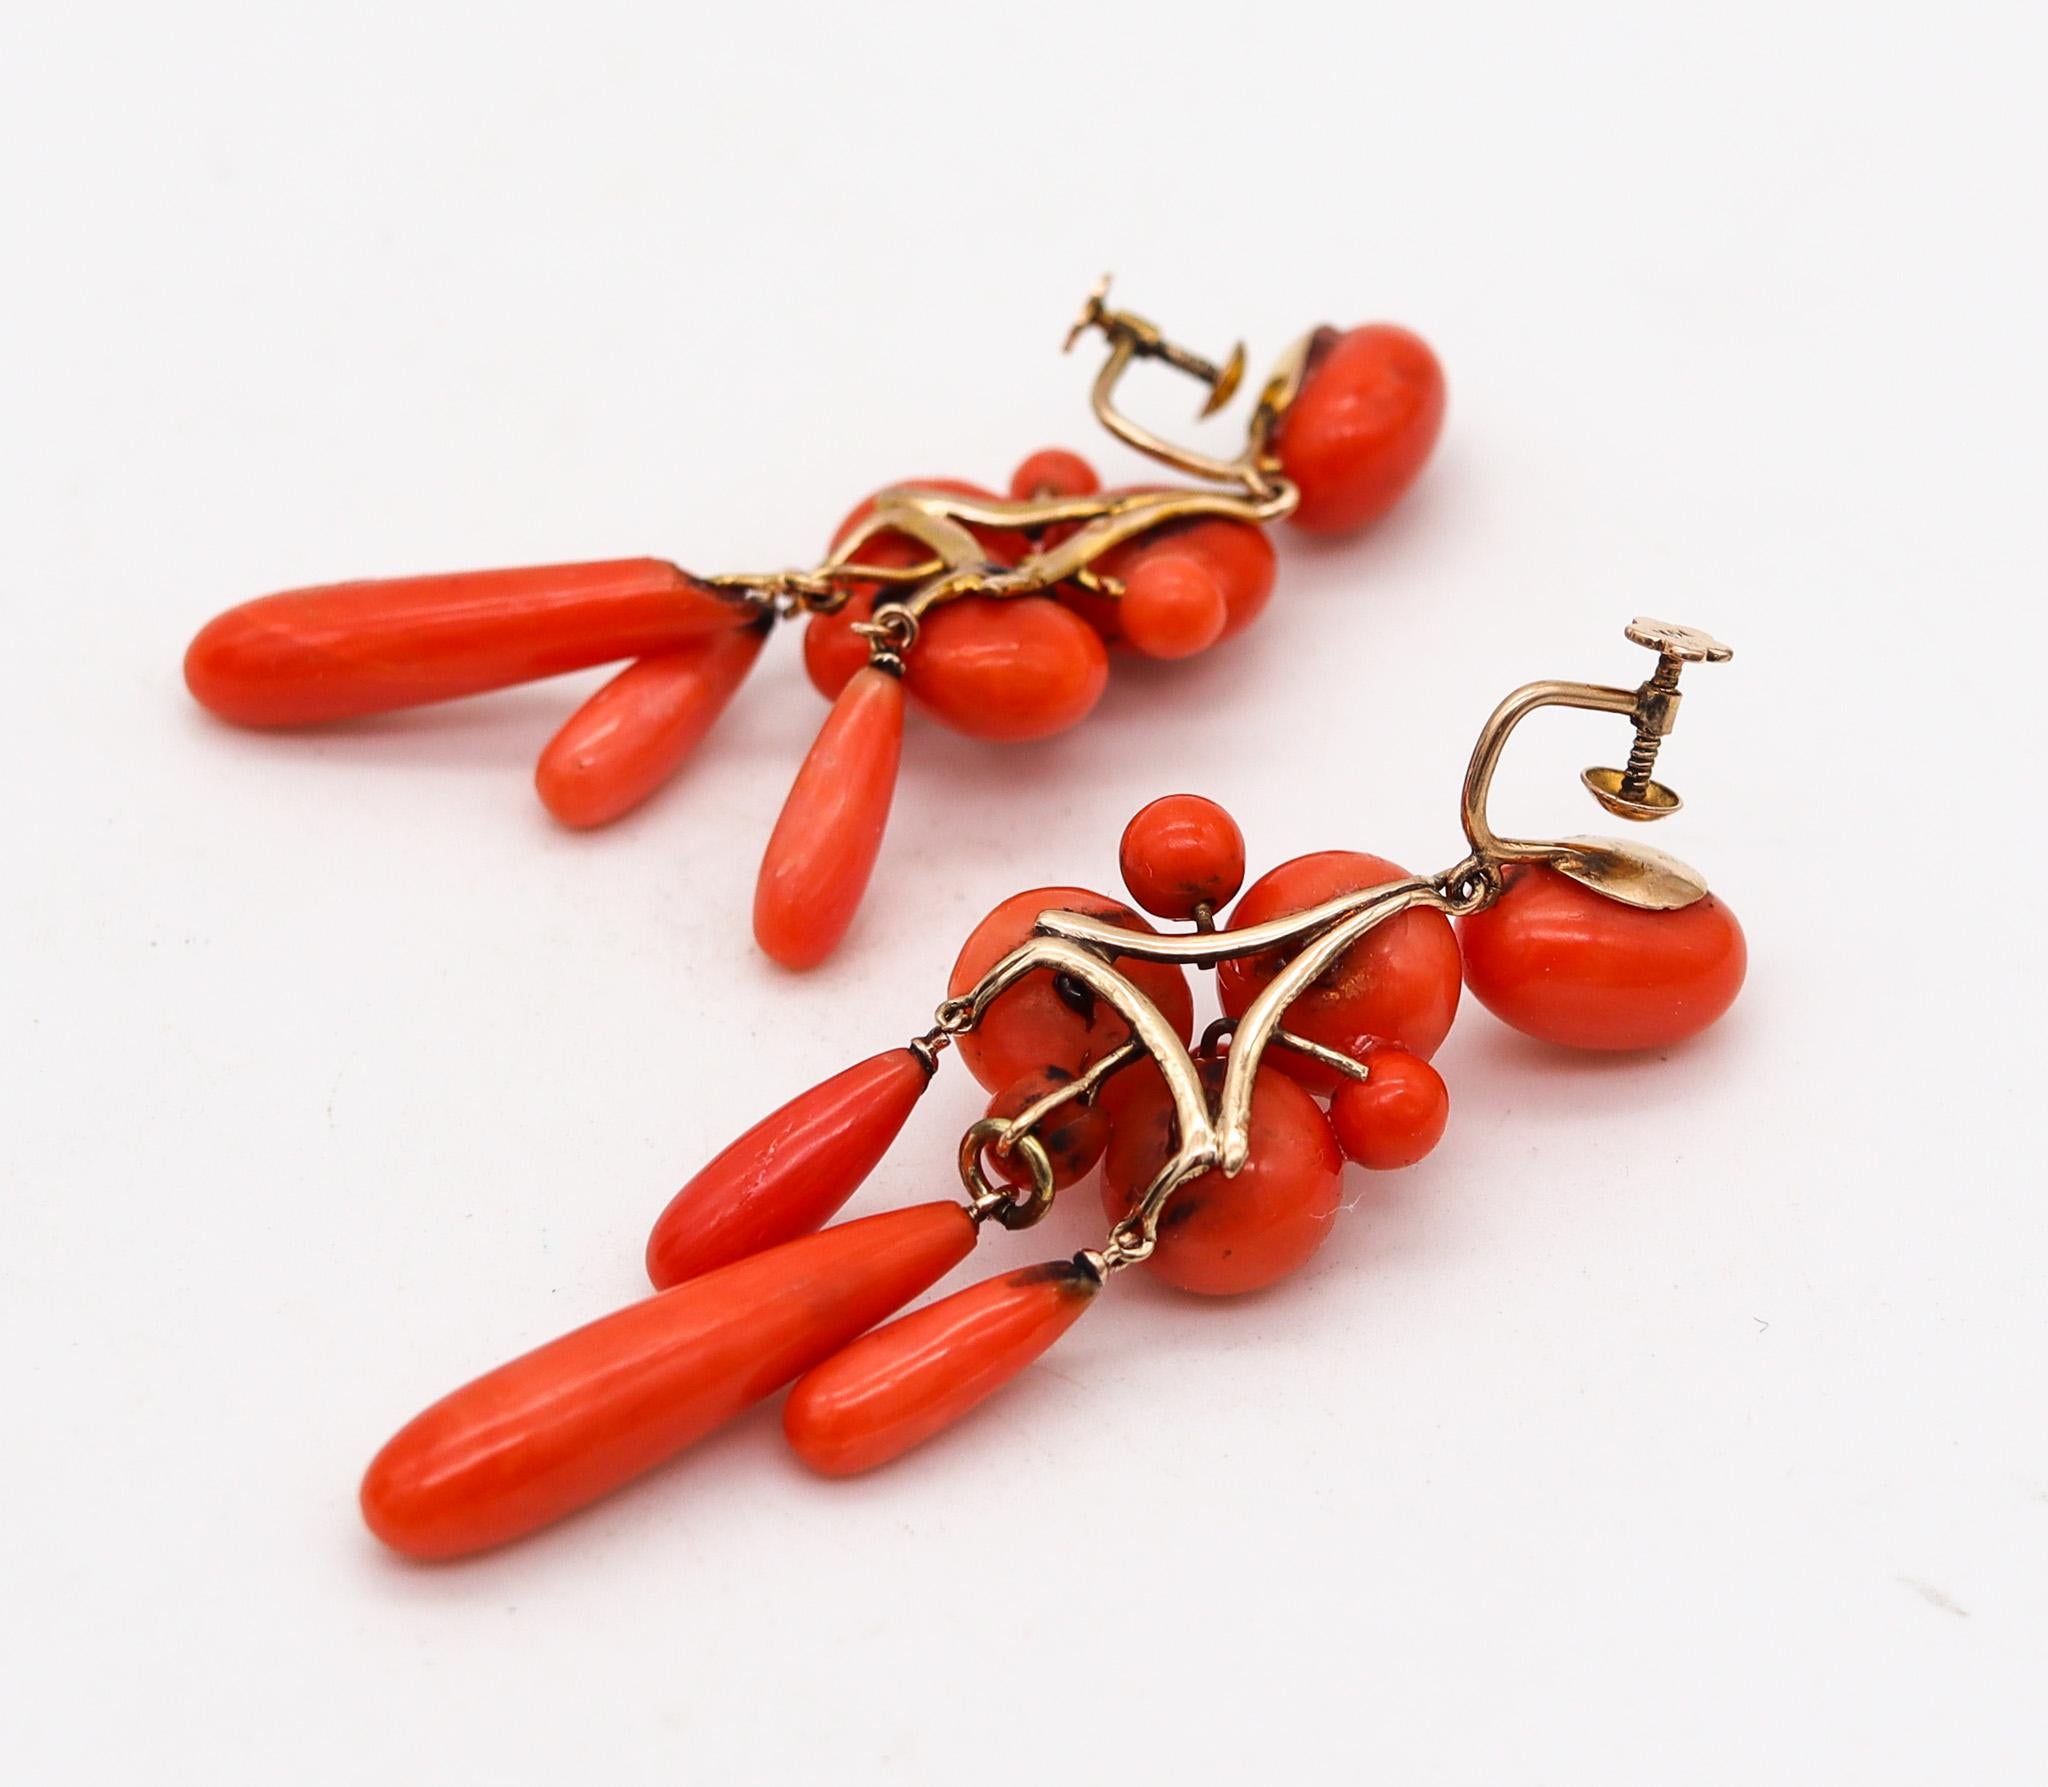 Late Victorian Victorian 1890 Italian Dangle Drop Earrings In I4Kt Yellow Gold With Red Corals For Sale